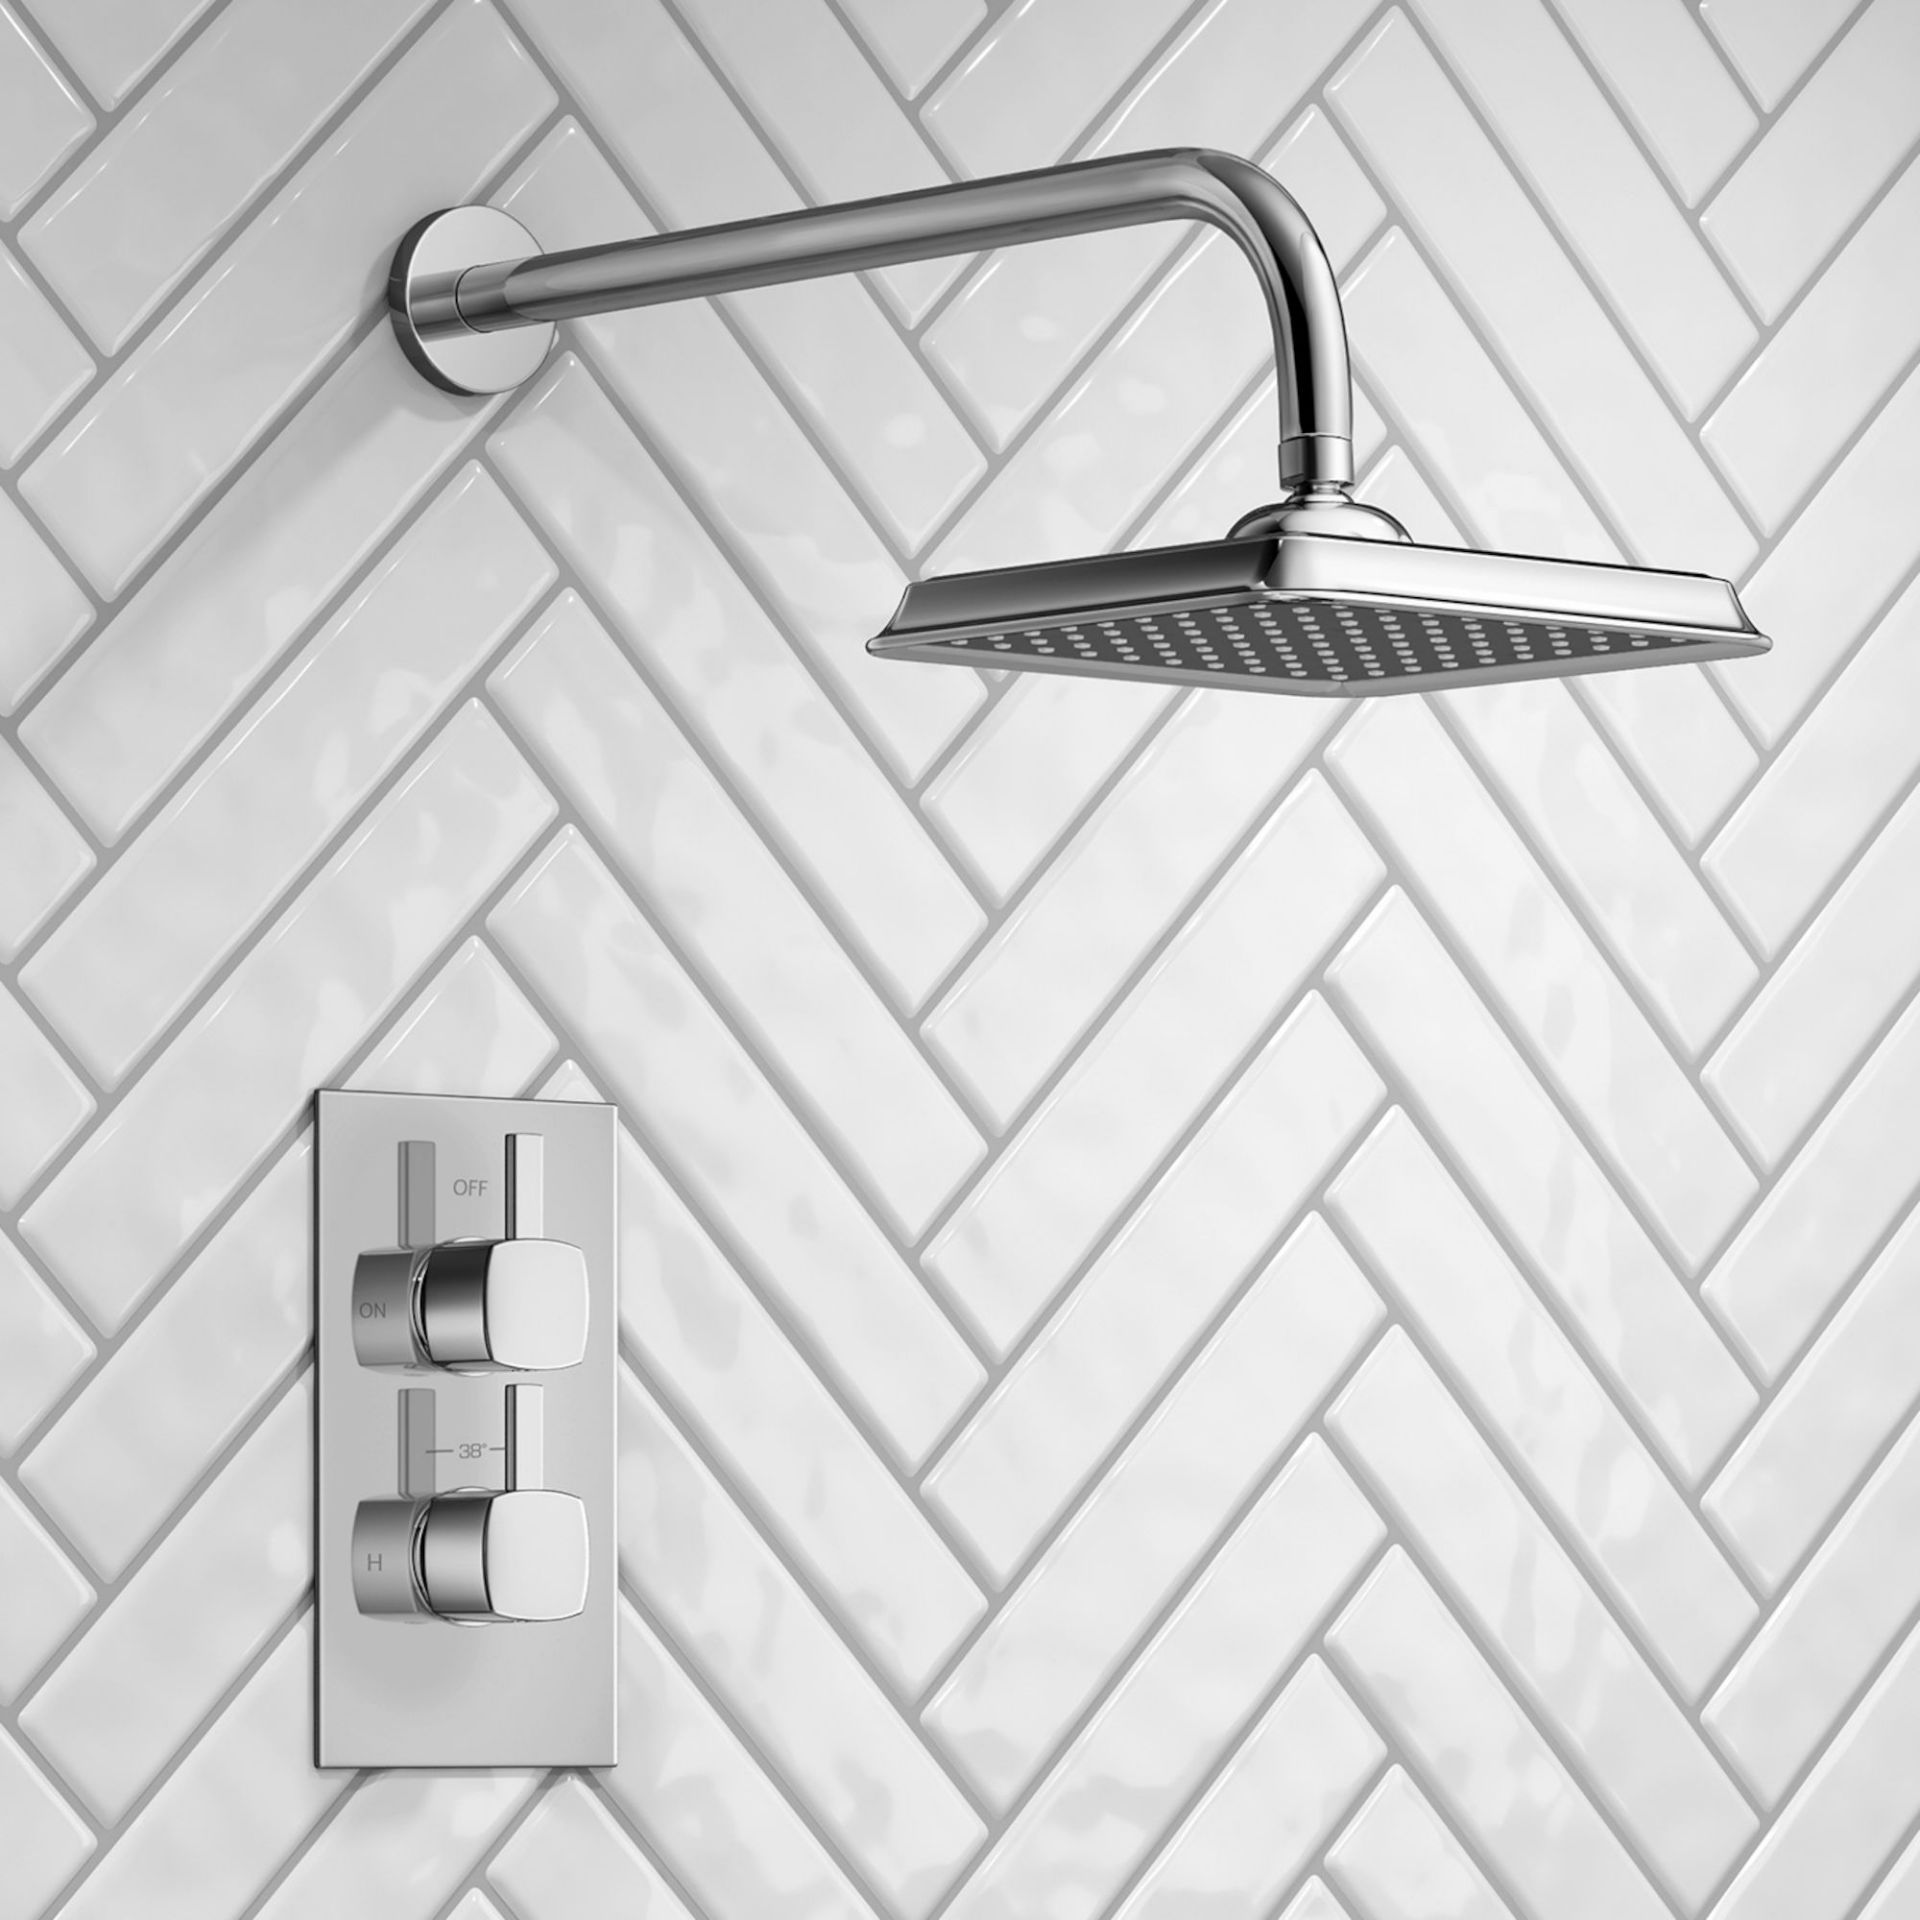 (DK50) Square Concealed Thermostatic Mixer Shower & Medium Head. Enjoy the minimalistic aesthetic of - Image 2 of 4